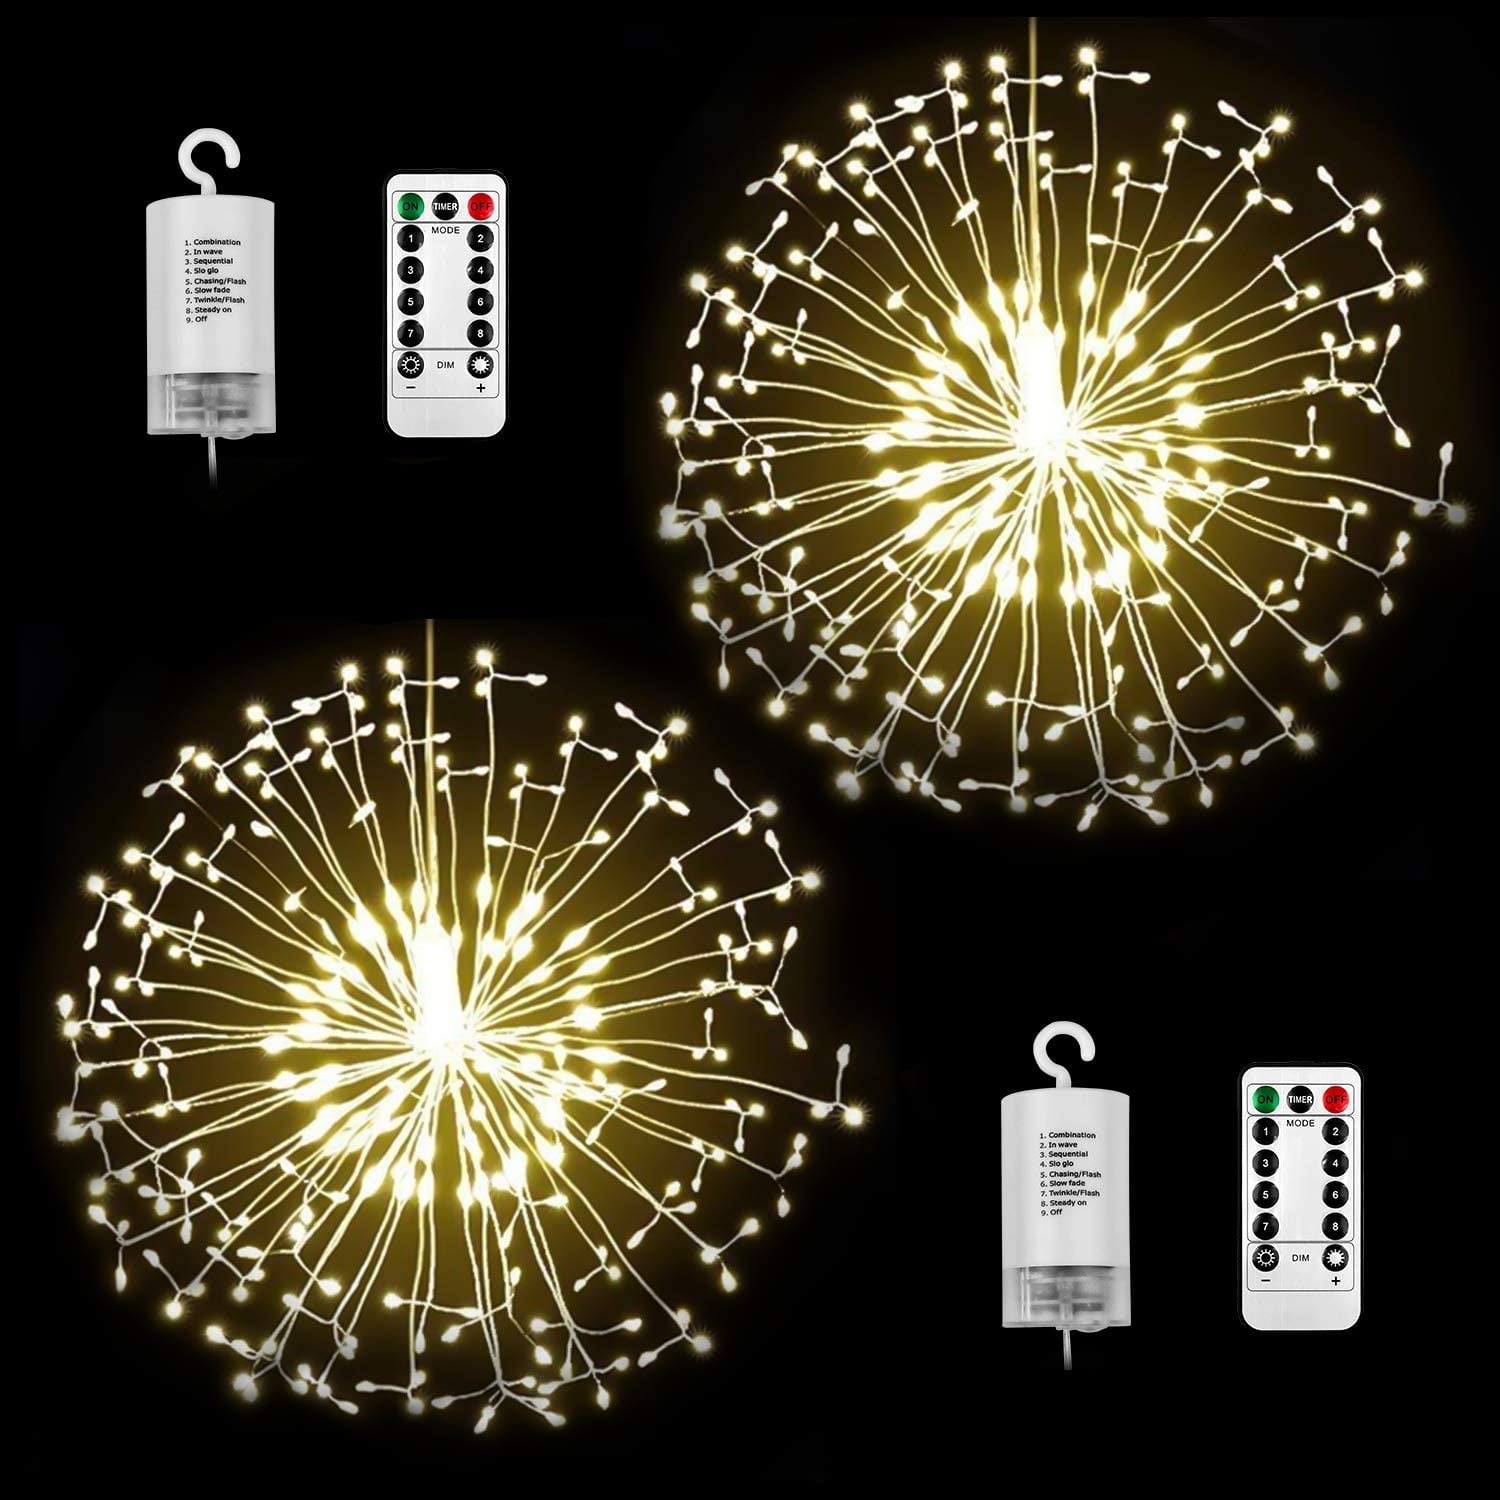 Hanging Starburst String Lights,2 Pack 8 Modes Waterproof 200 LED Bouquet Shape Fireworks Fairy Twinkle Light Battery Operated With Remote Control For Home,Gardens,Patios,Study. Warm White,2 Pack 